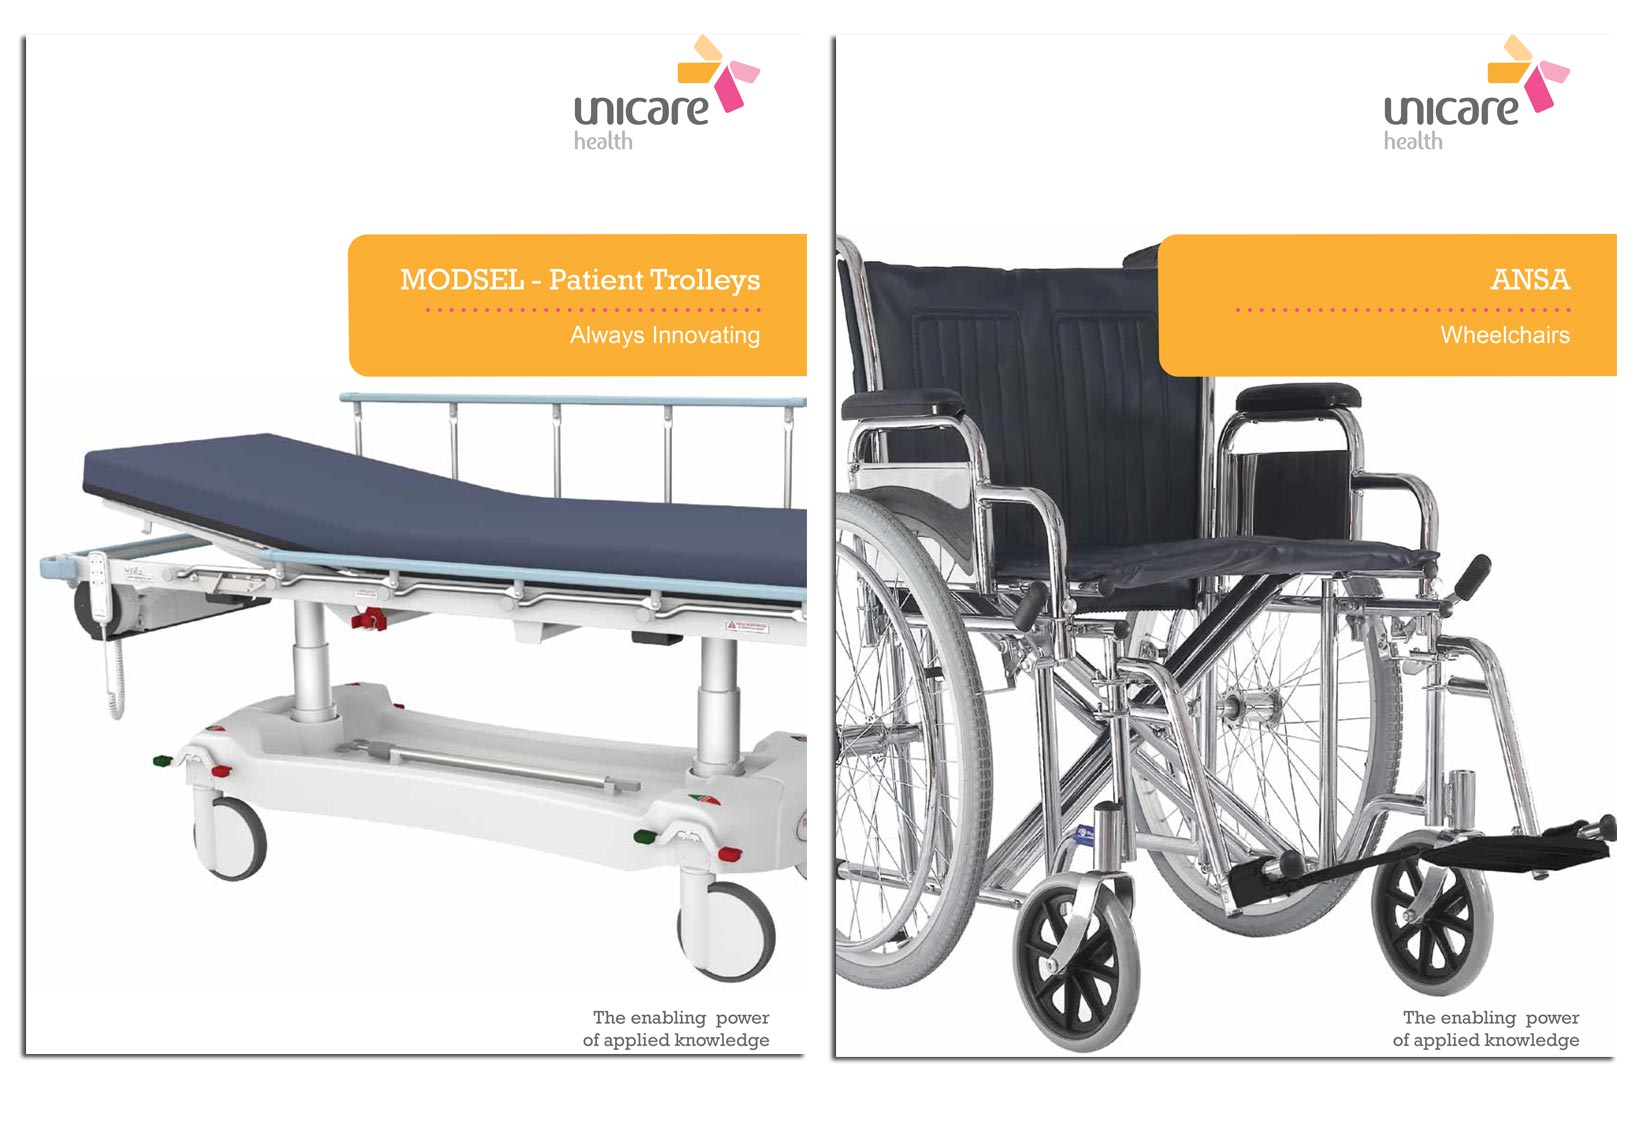 Unicare Health Product Brochures